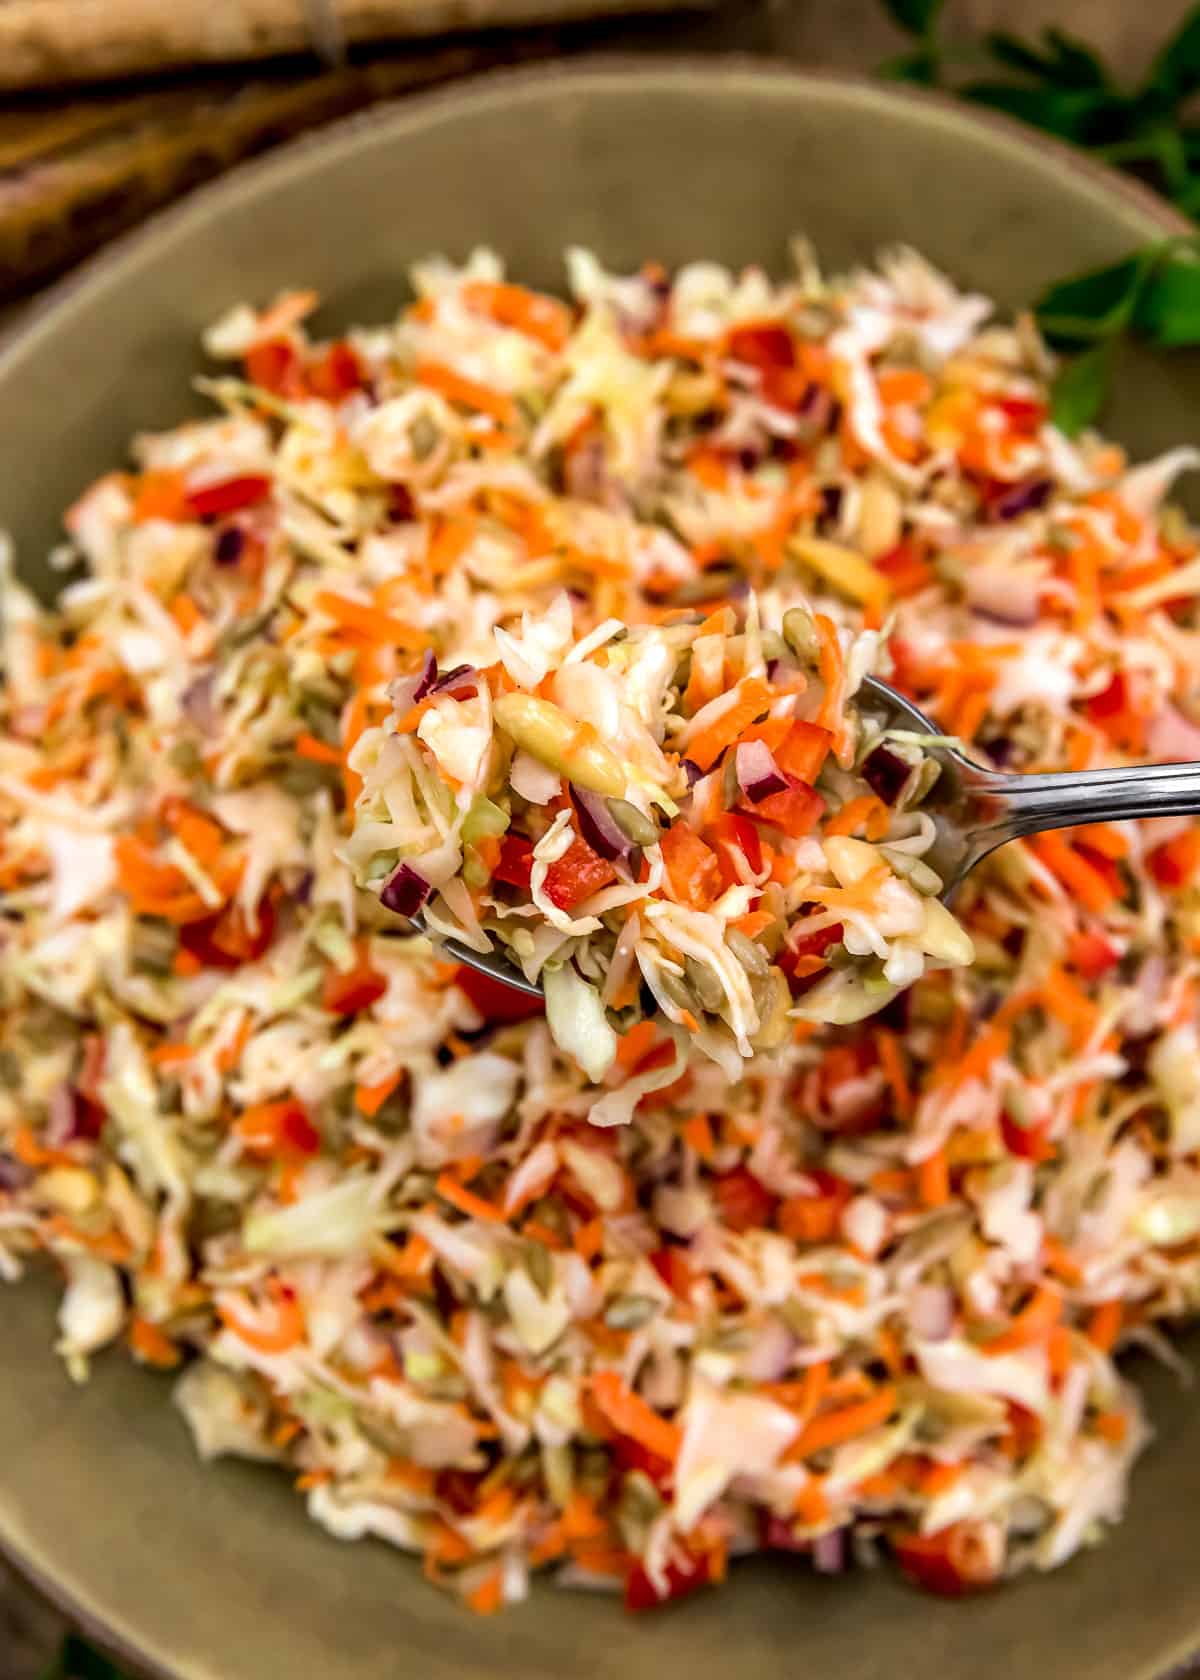 Spoonful of Easy Vinegar Coleslaw with Toasted Sunflower Seeds